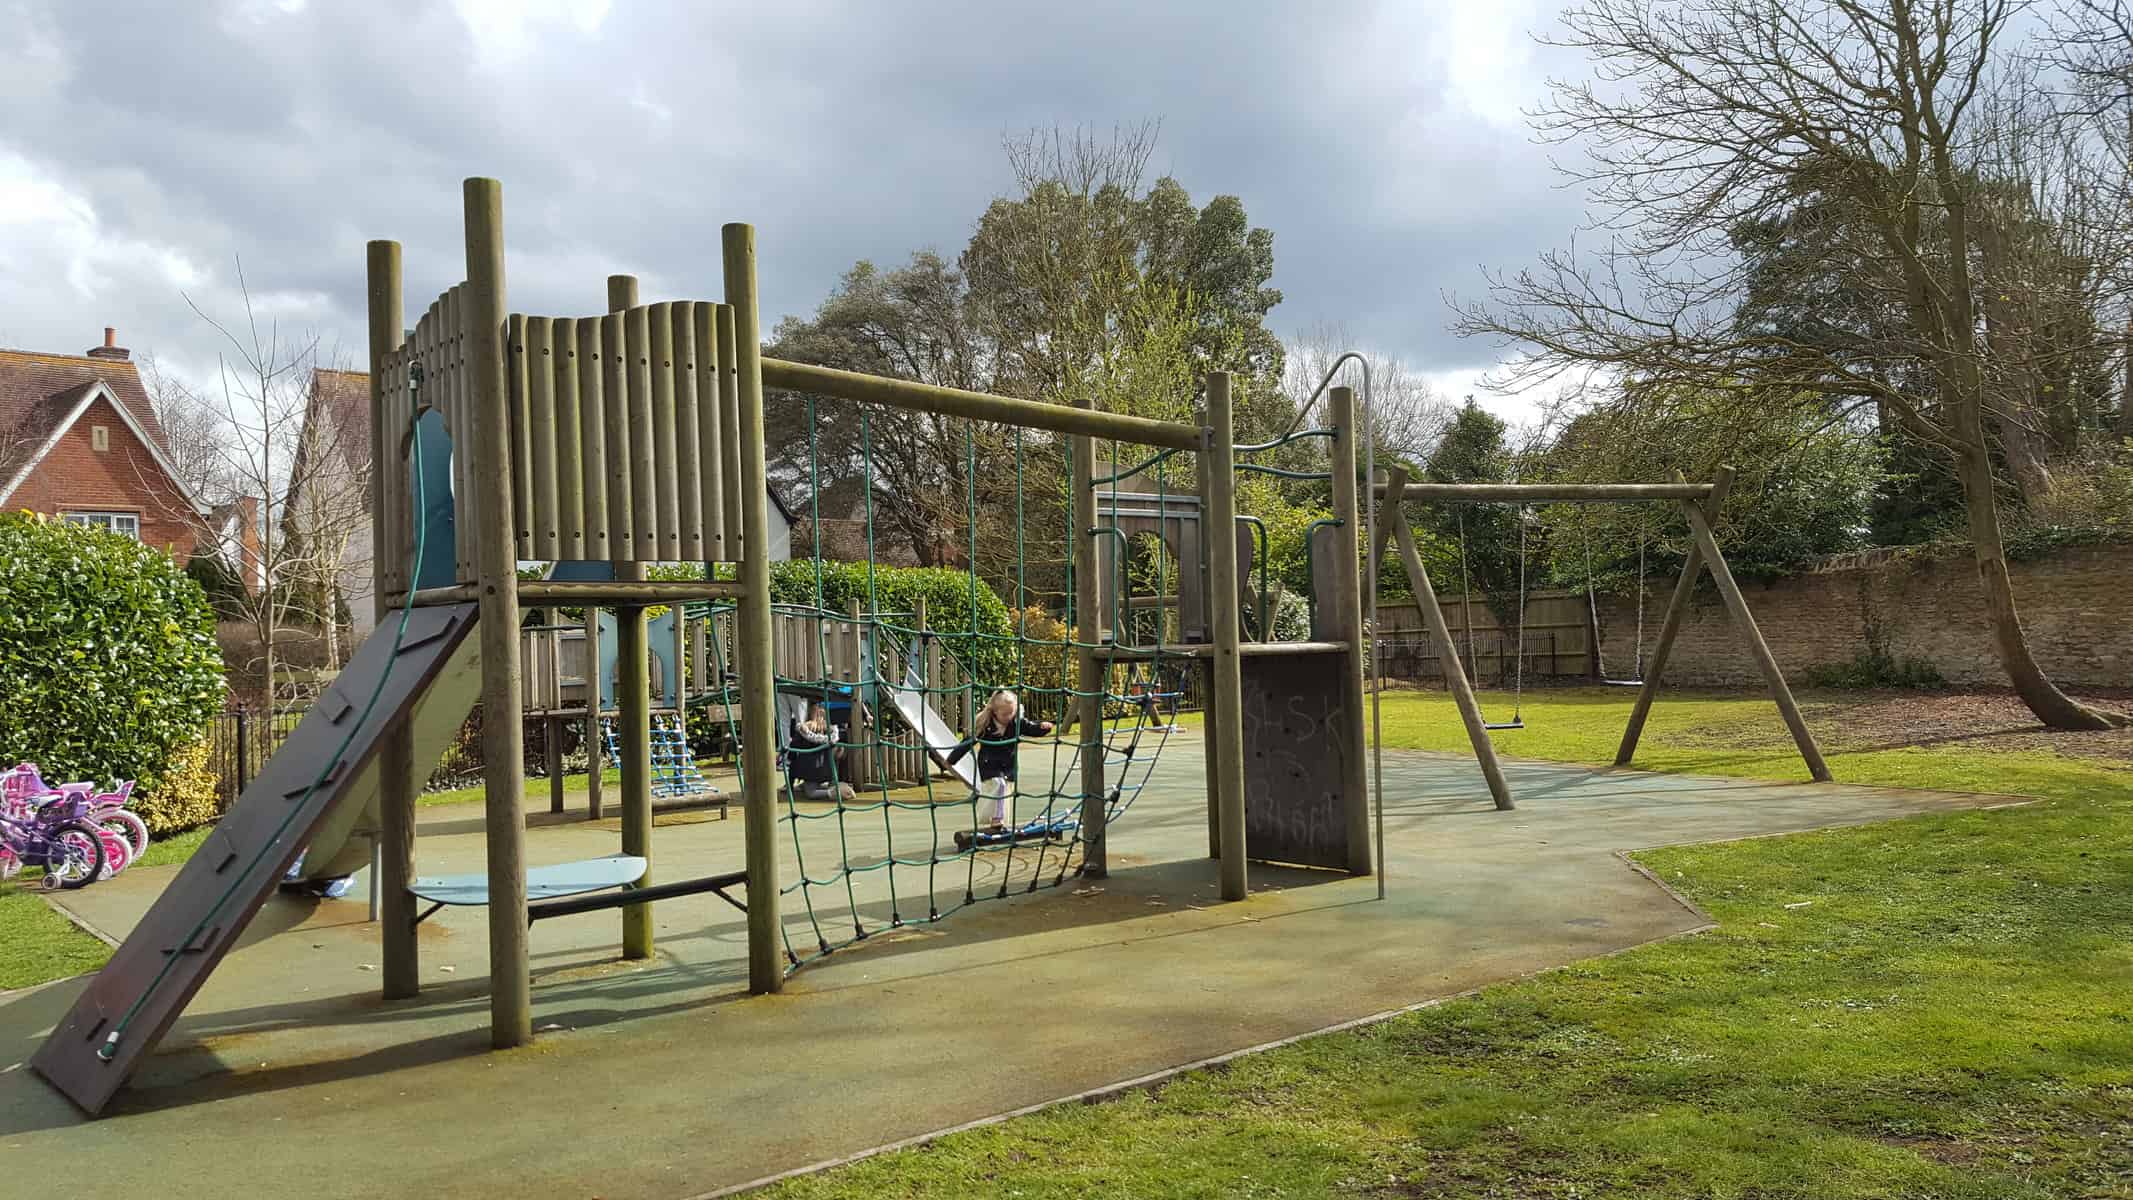 Playgrounds, play areas and play parks near Sutton Courtenay - freeparks.co.uk